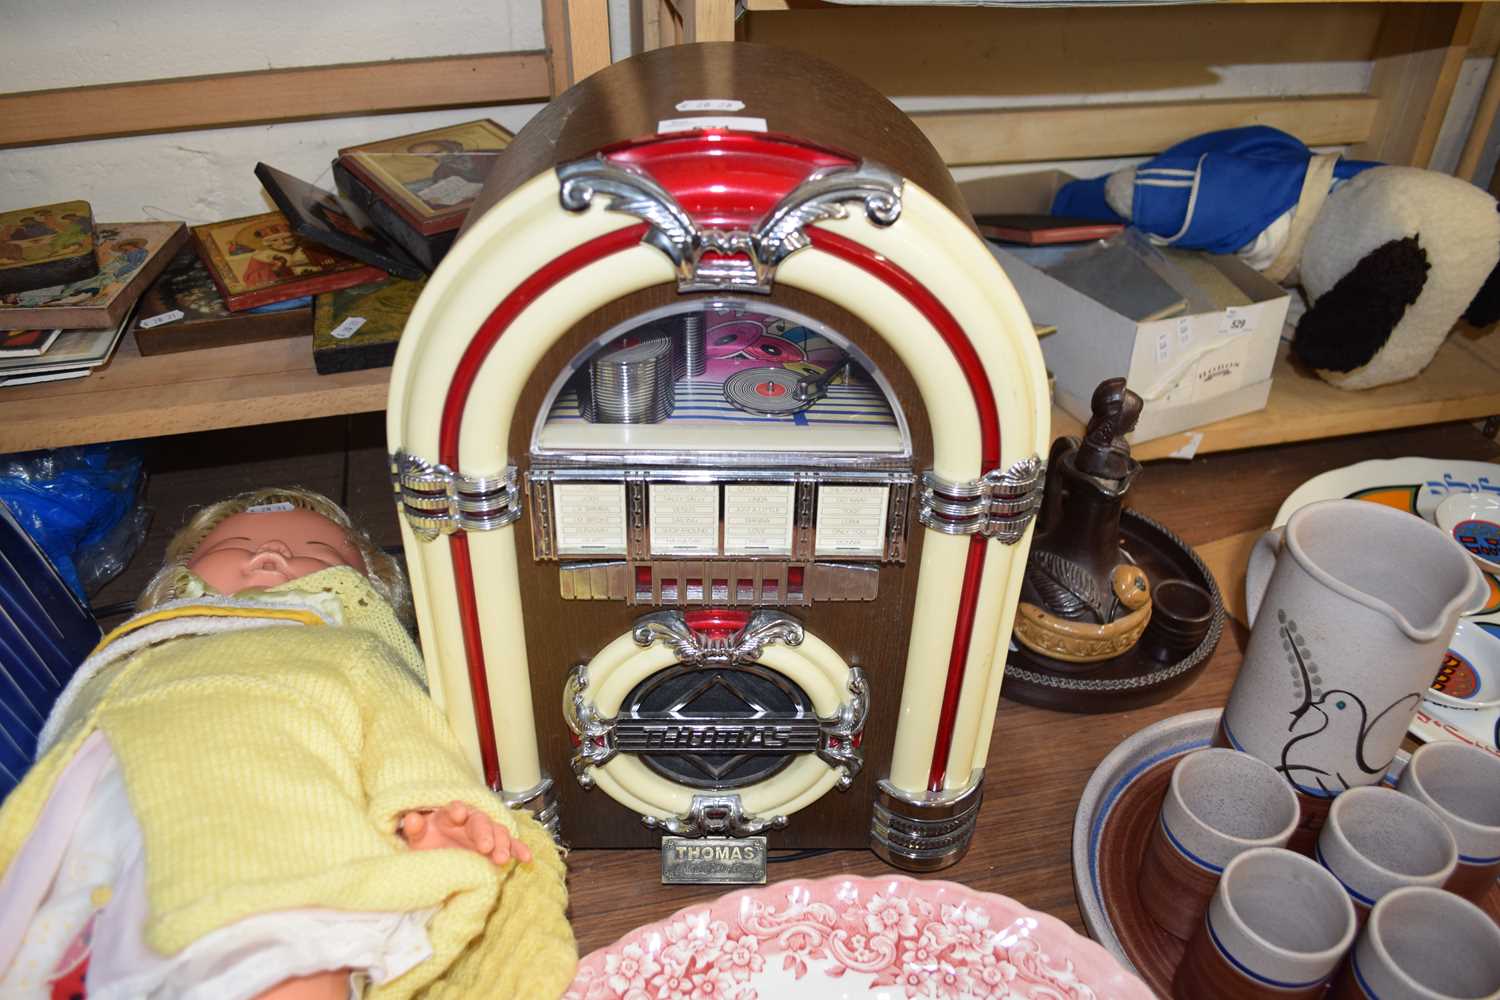 THOMAS COLLECTORS EDITION RADIO FORMED AS A JUKEBOX Failed Electrical Test